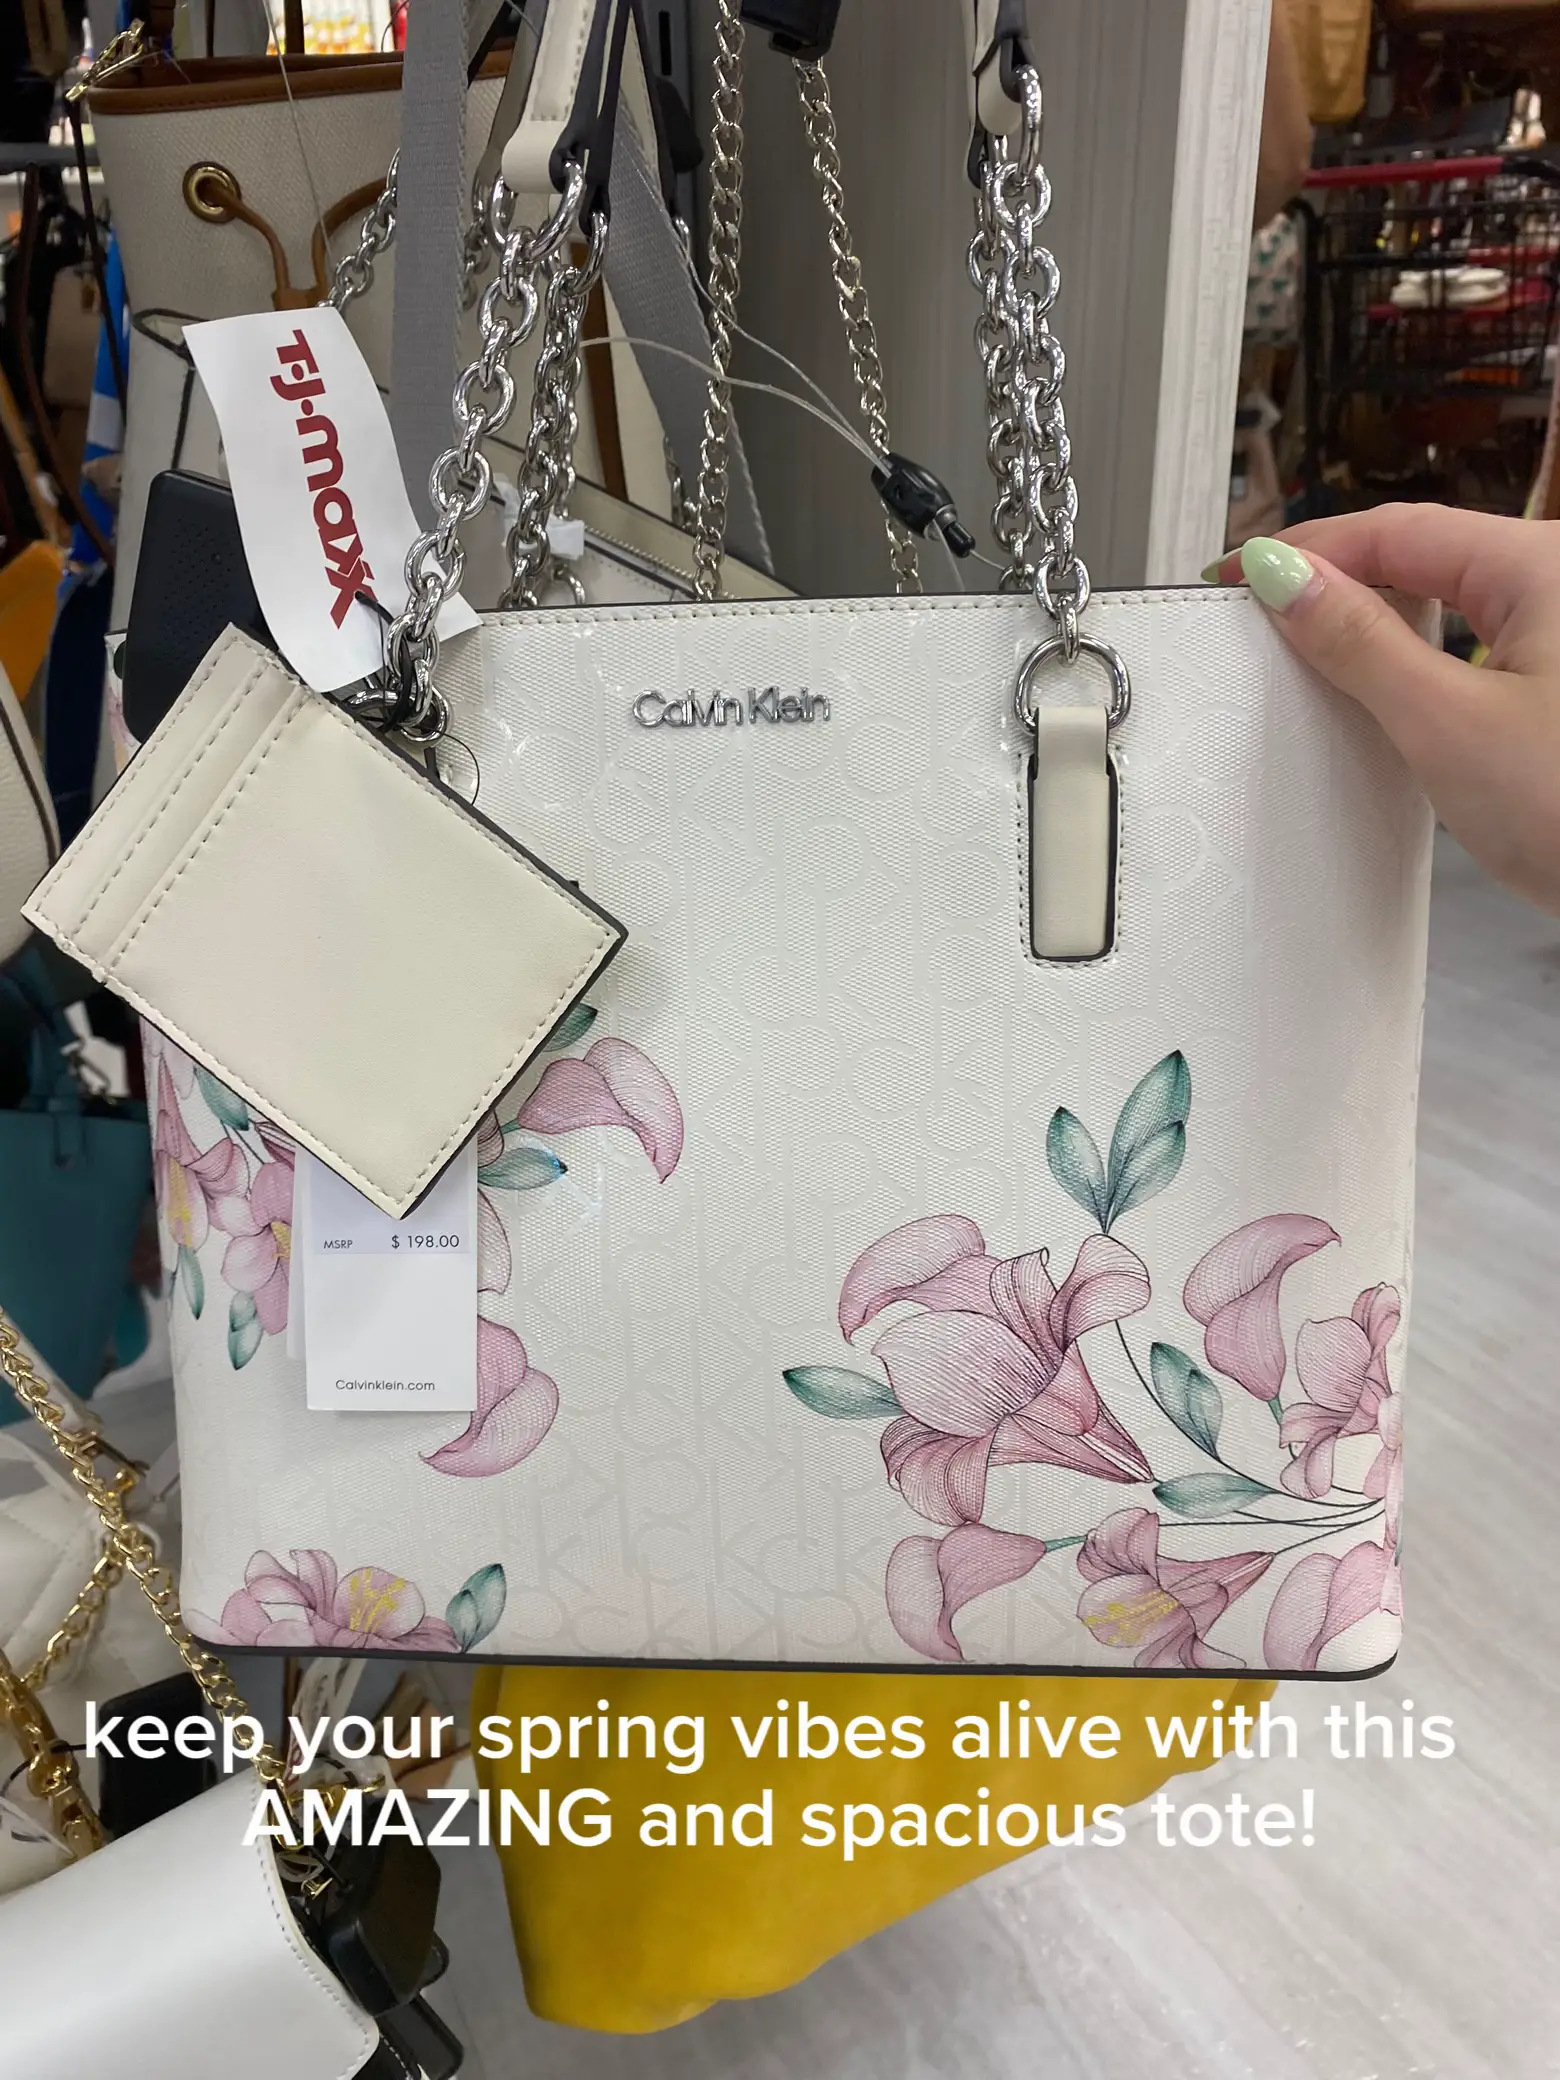 T.J.Maxx Leather Tote Bags